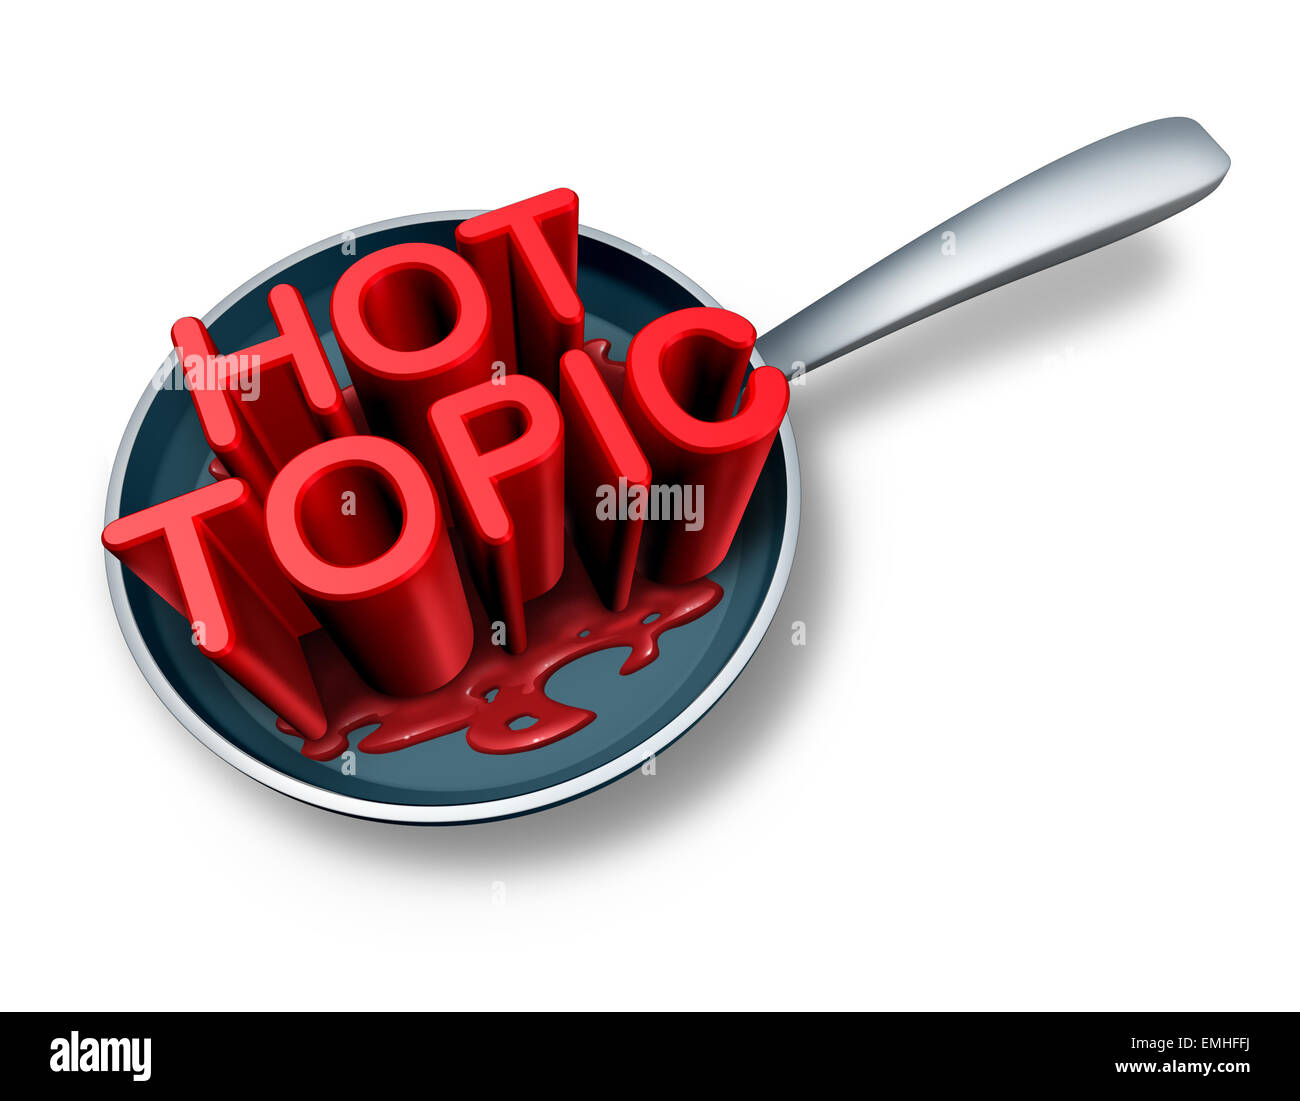 Hot topic and breaking news symbol as the word for current social newsflash events in a frying pan as a press headline icon for Stock Photo